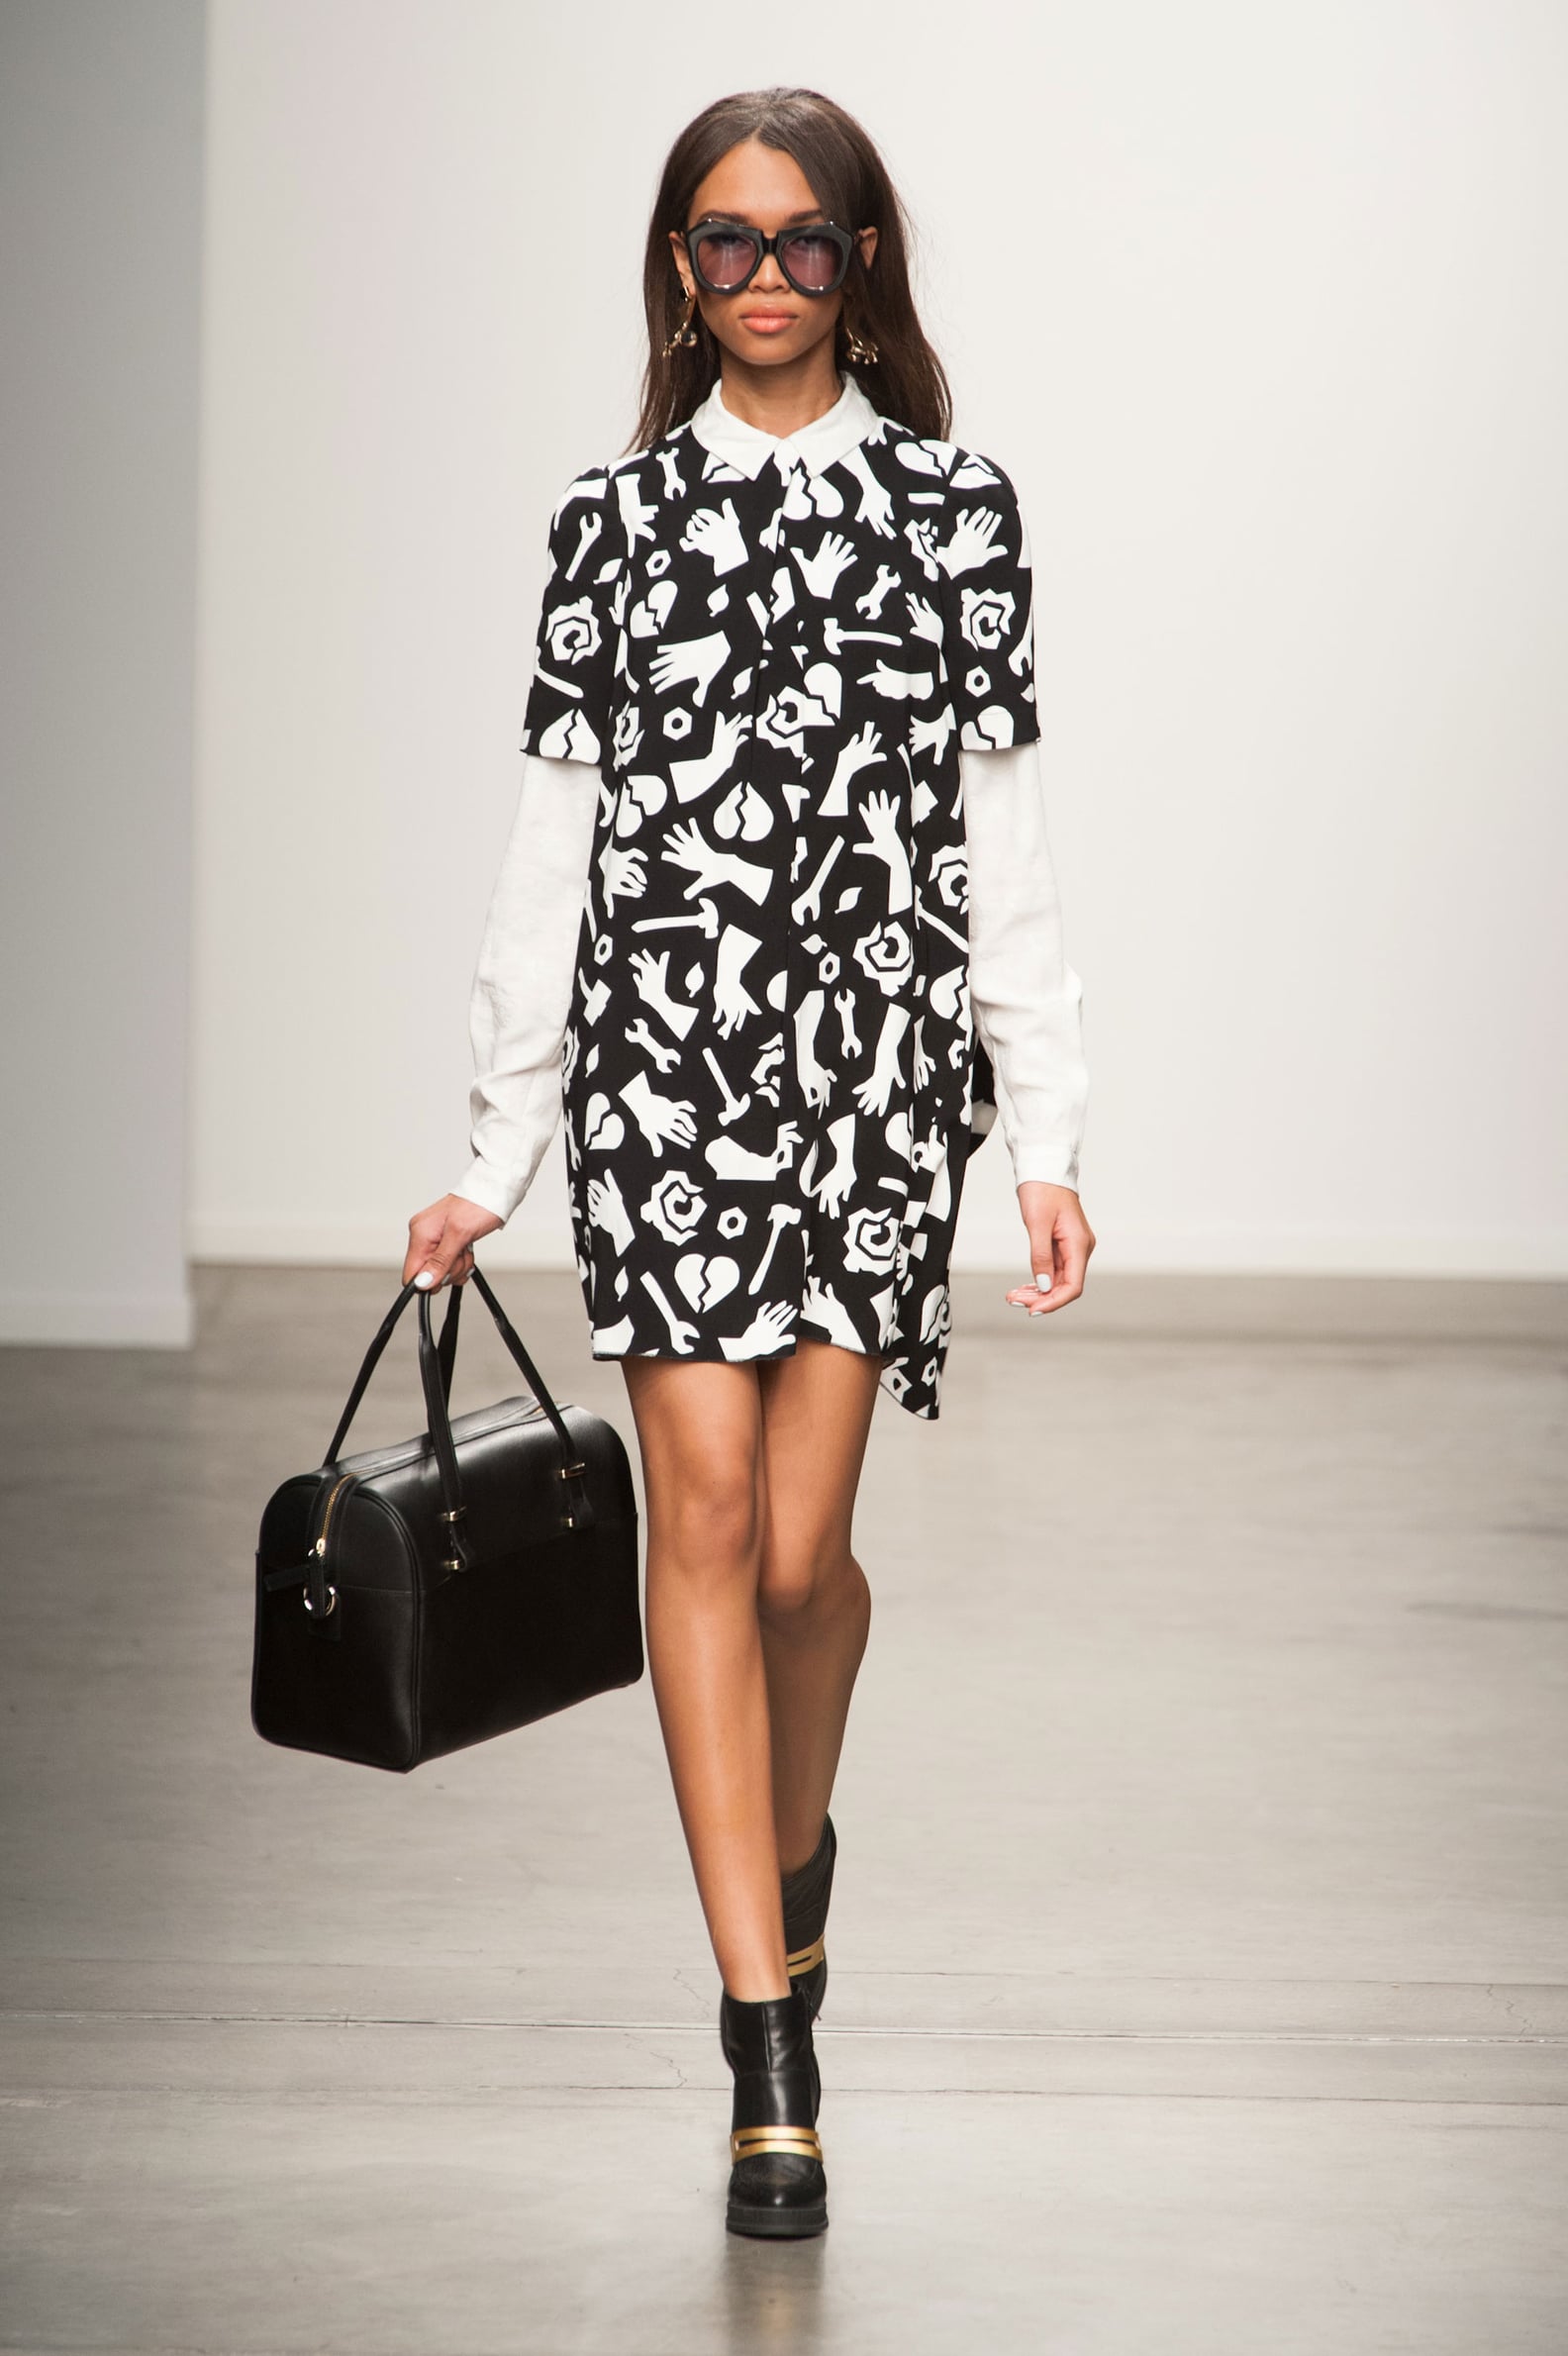 100 Best Outfits From Fashion Week For Fall 2014 | POPSUGAR Fashion